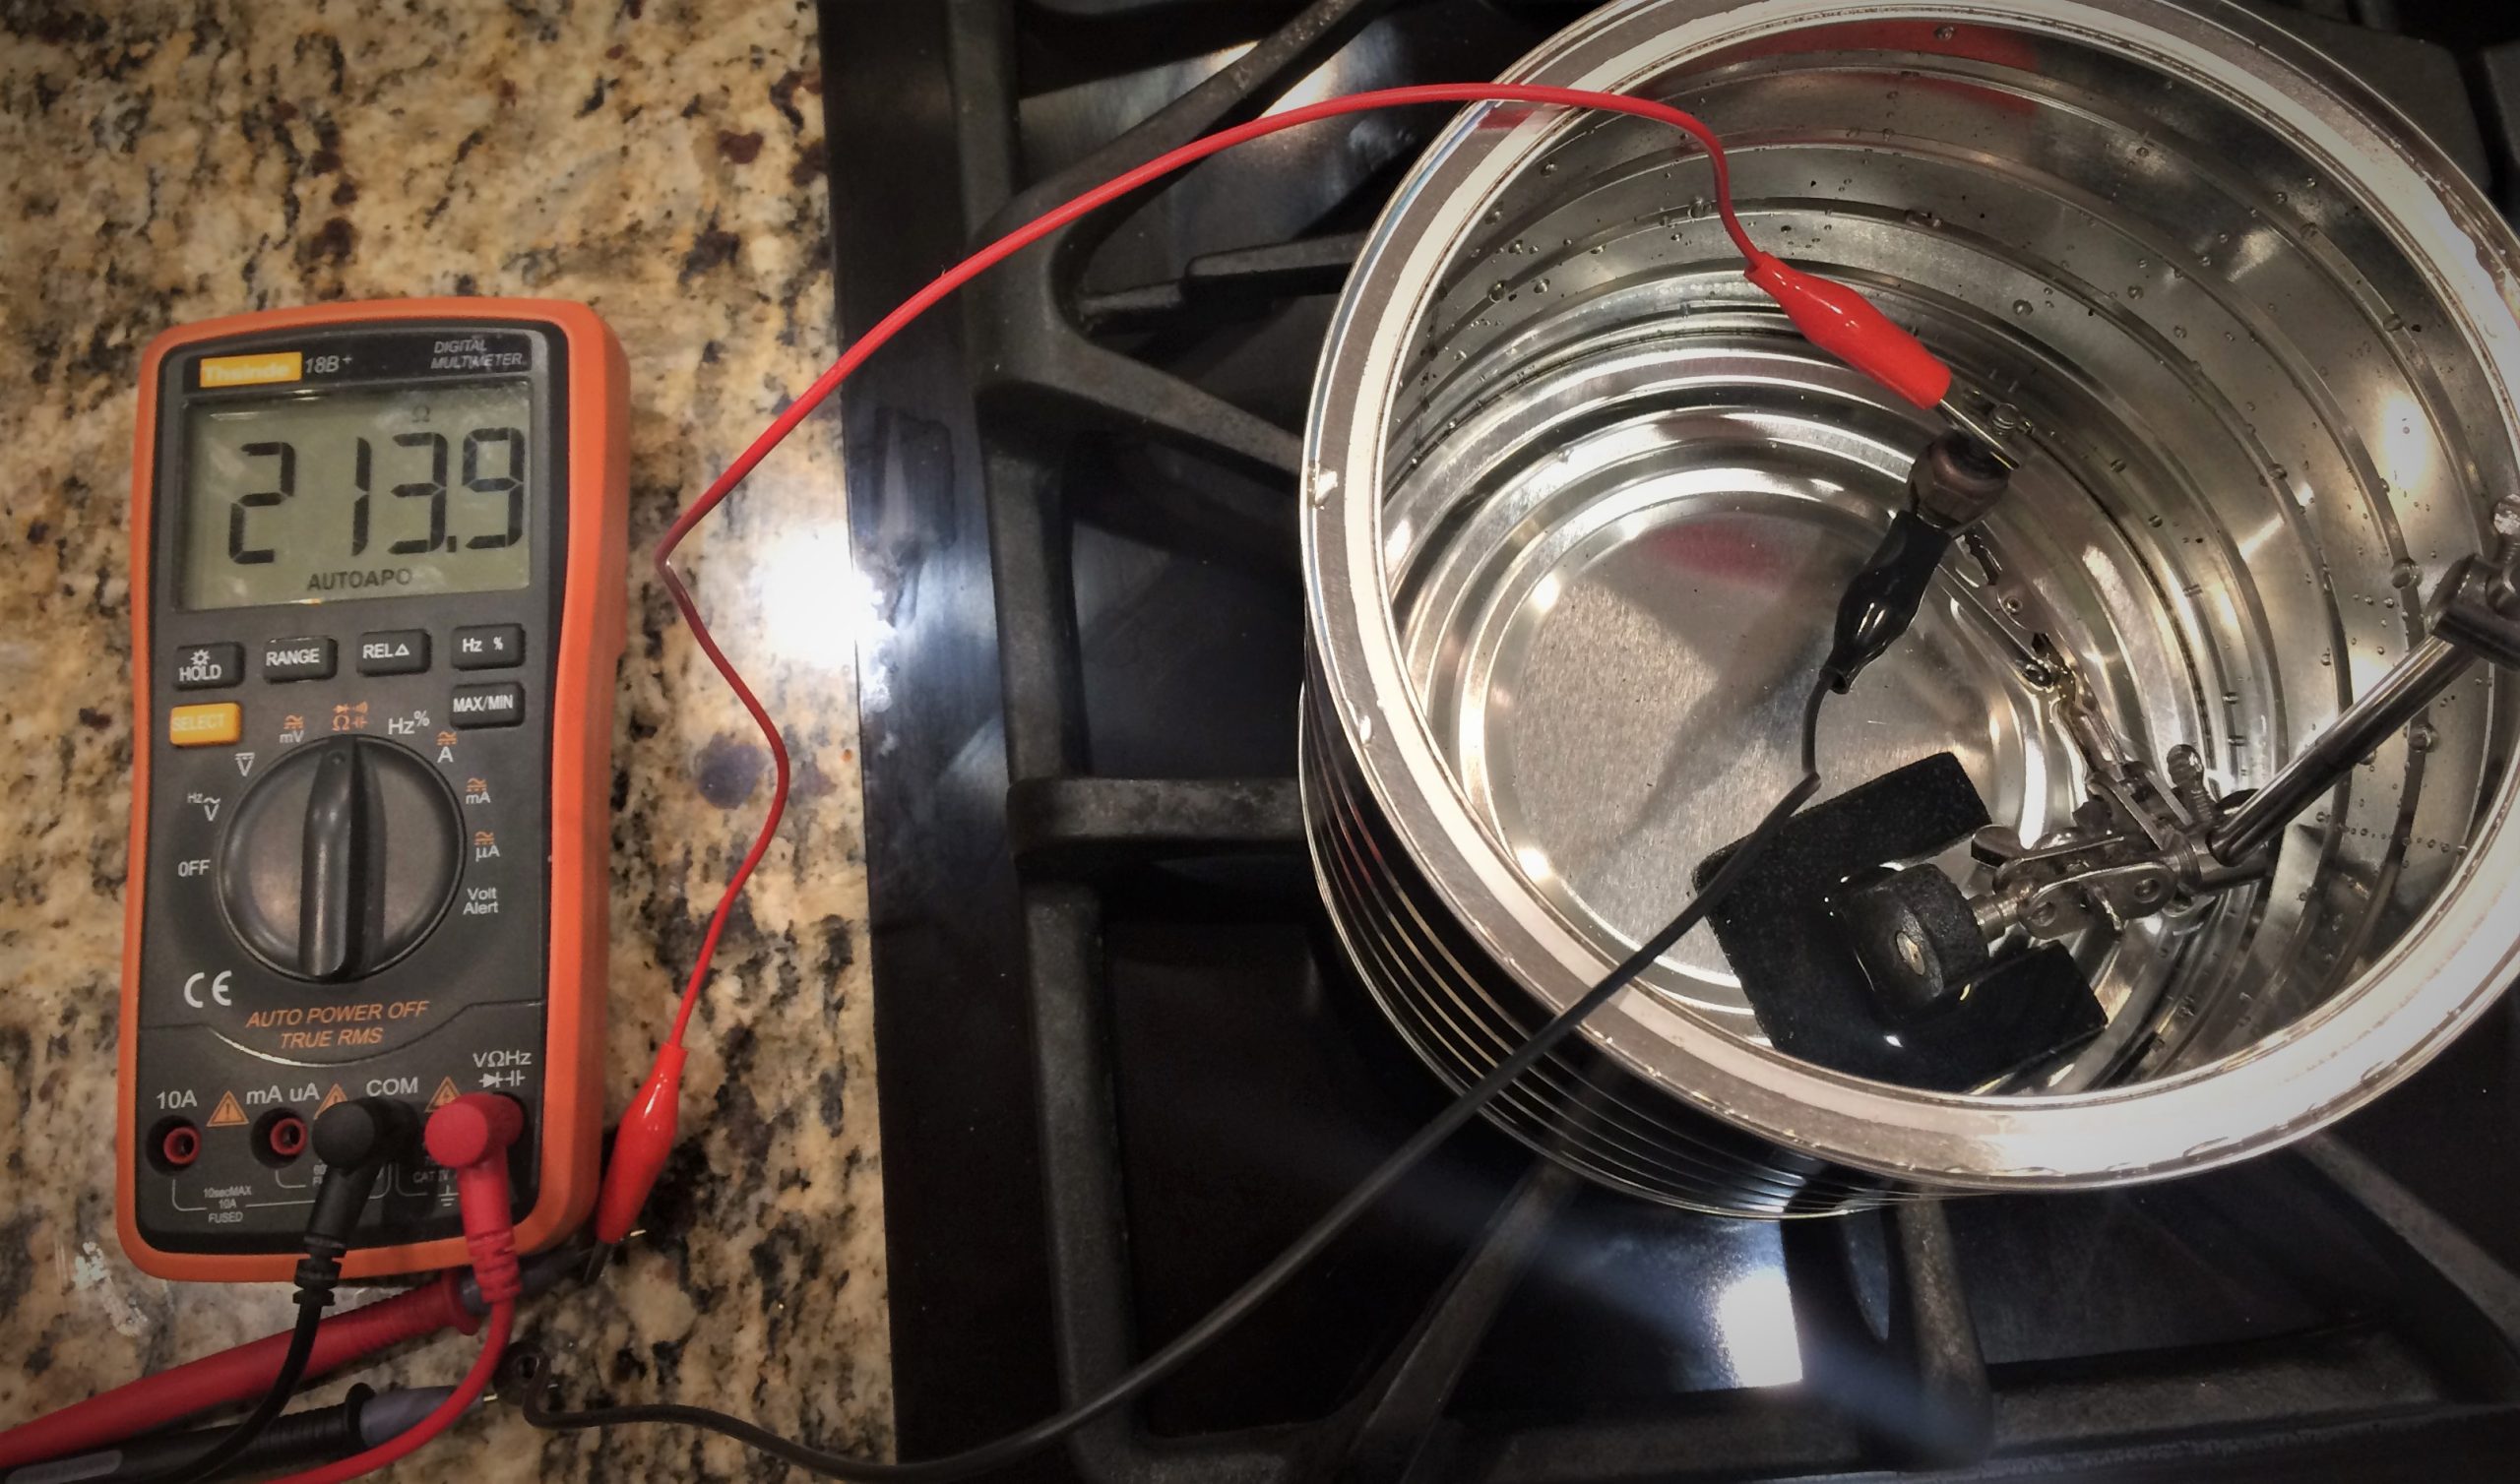 https://www.onallcylinders.com/wp-content/uploads/2022/07/28/testing-electrical-water-temprature-gauge-sending-unit-in-kitchen-with-multimeter-scaled.jpg